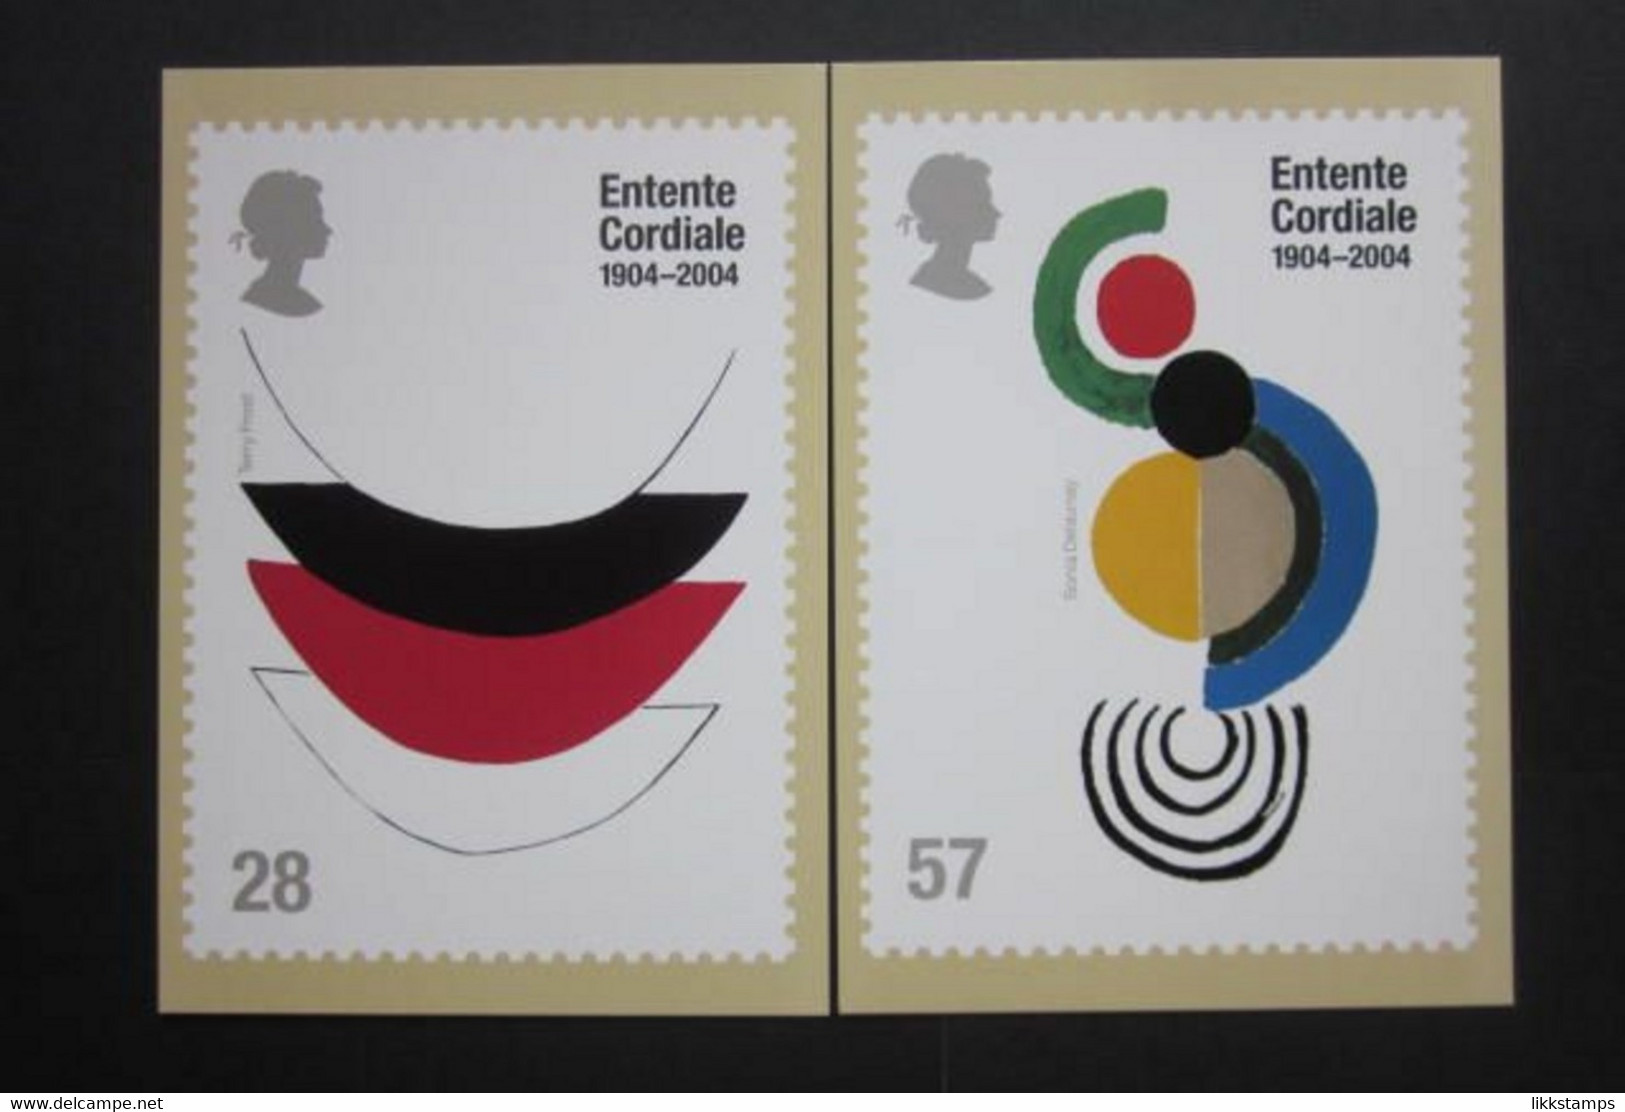 2004 THE CENTENARY OF THE ENTENTE CORDIALE P.H.Q. CARDS UNUSED, ISSUE No. 263 (B) #01519 - PHQ Cards